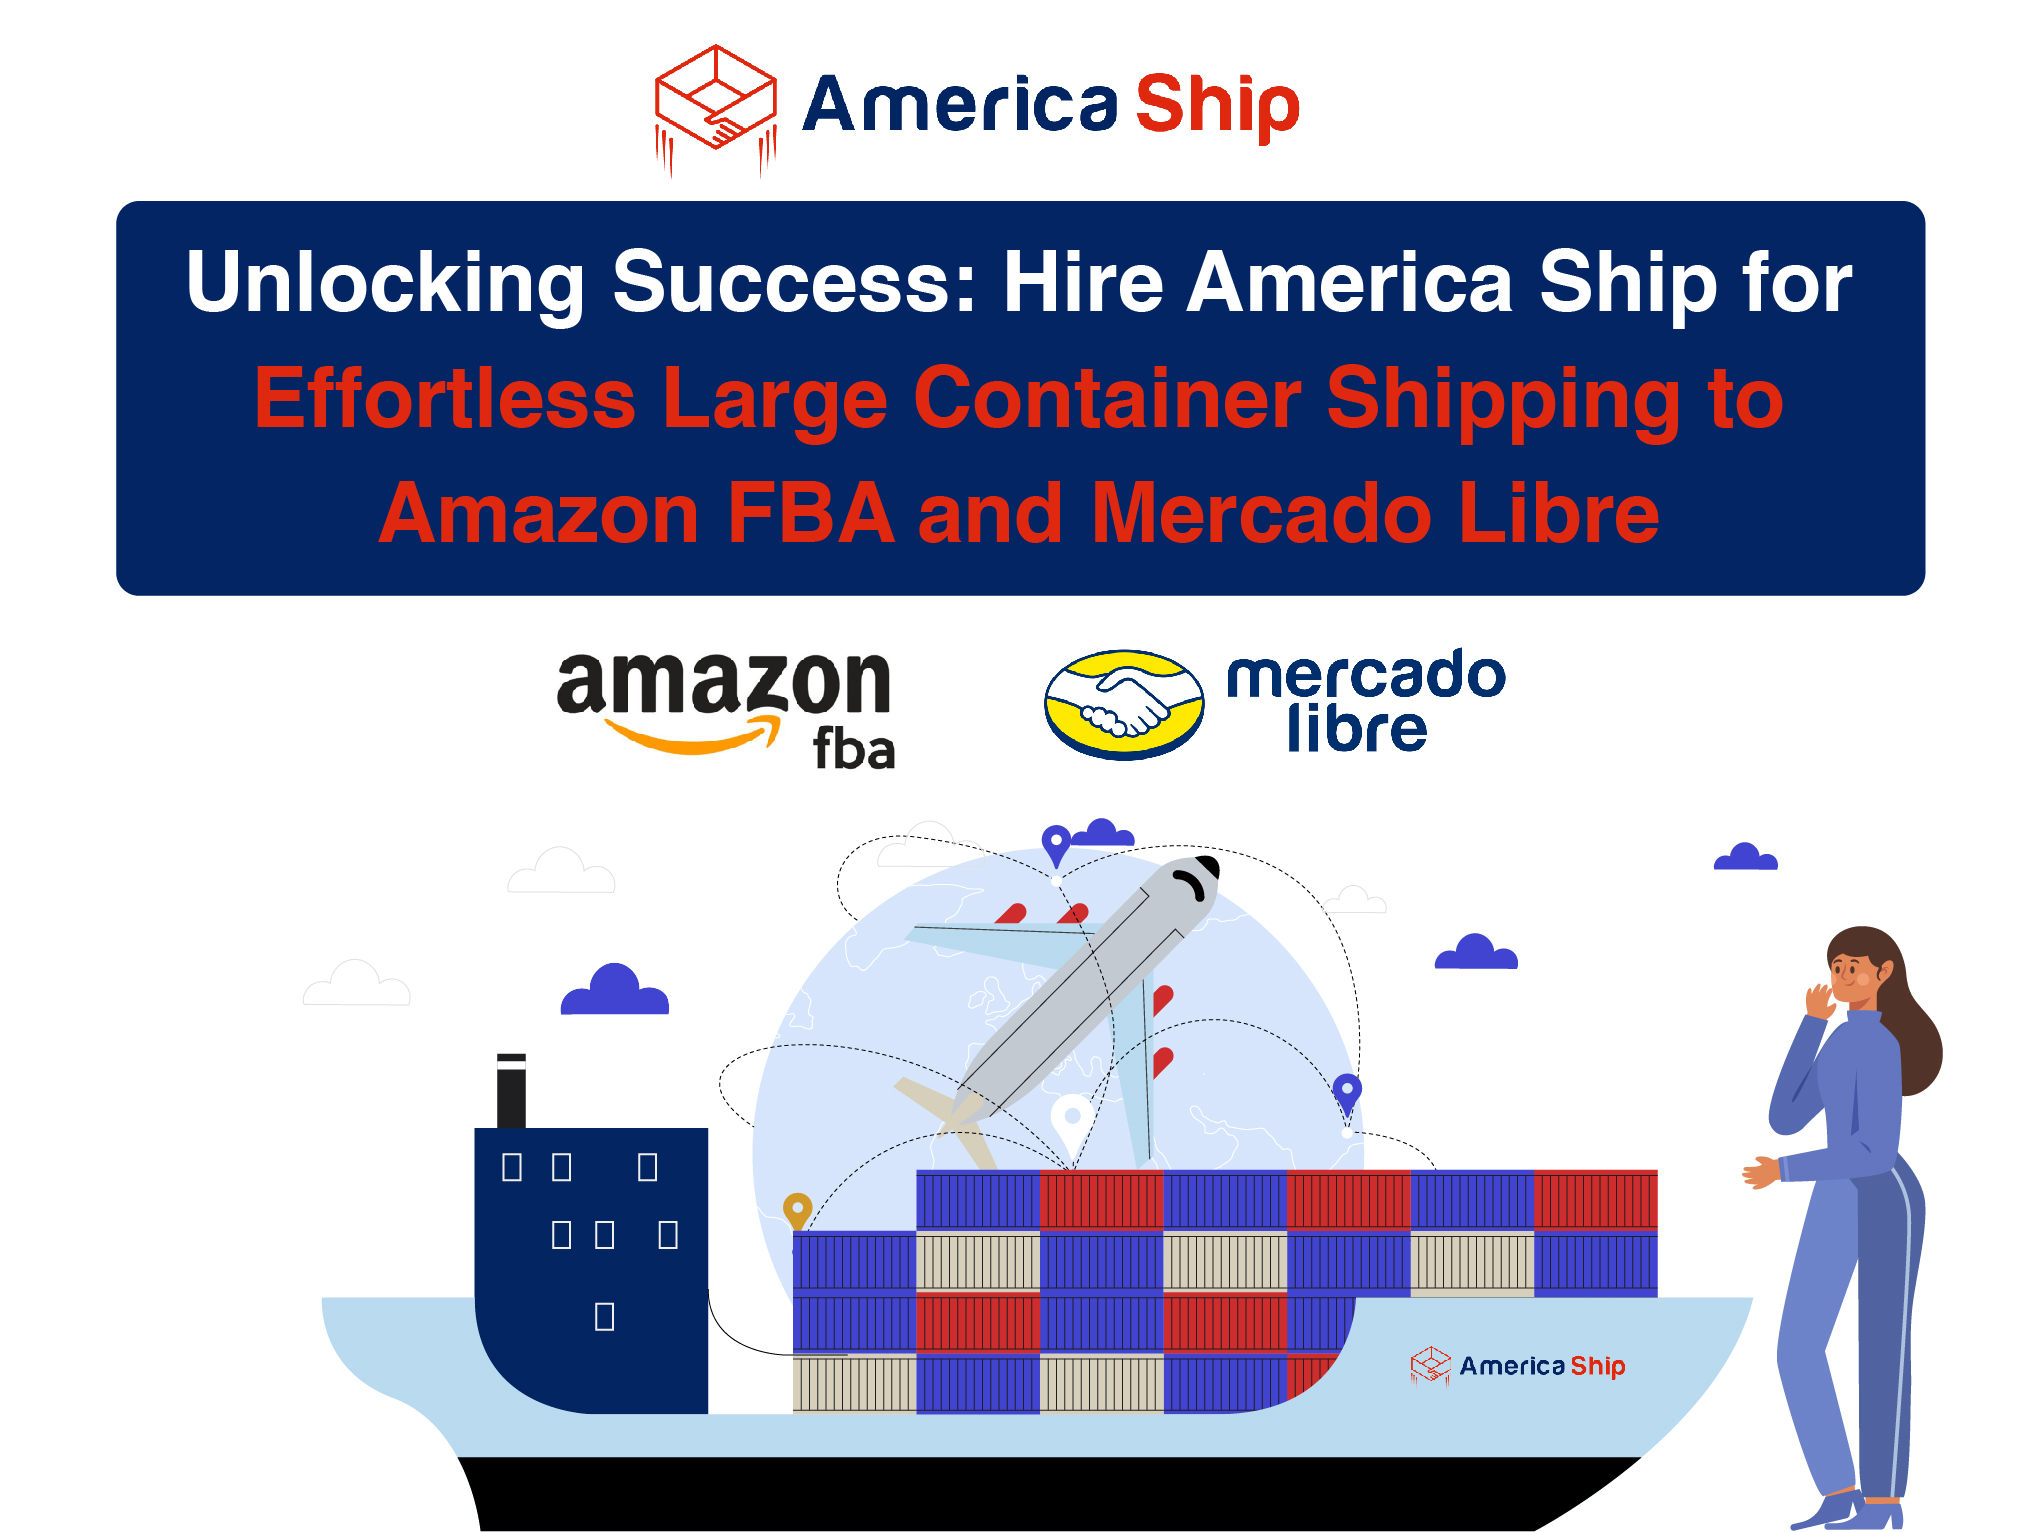 Unlocking Success: Hire America Ship for Effortless Large Container Shipping to Amazon FBA and Mercado Libre